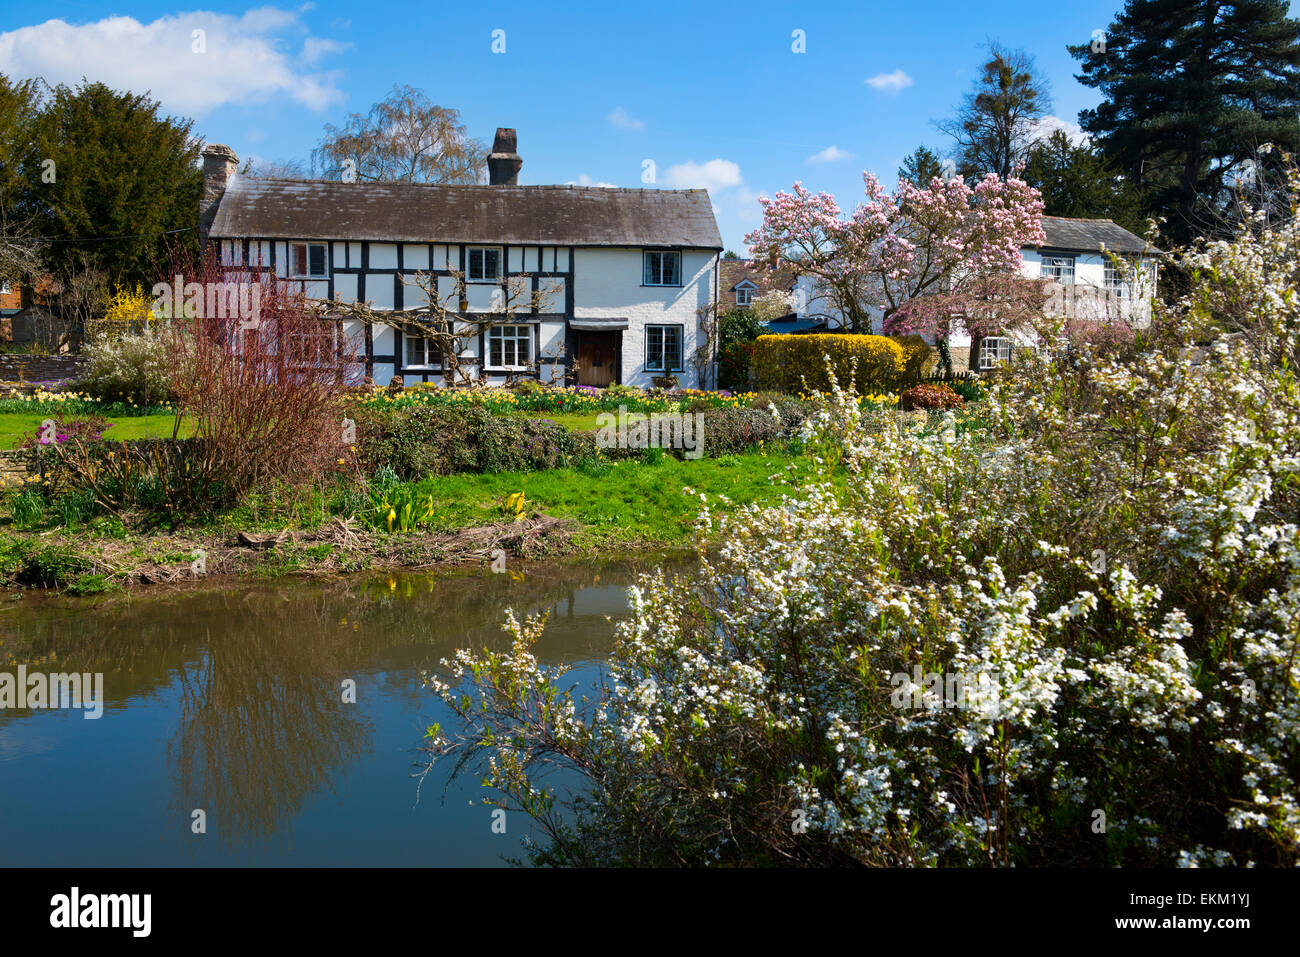 Spring colour in the village of Erdisland, Herefordshire, England. Stock Photo